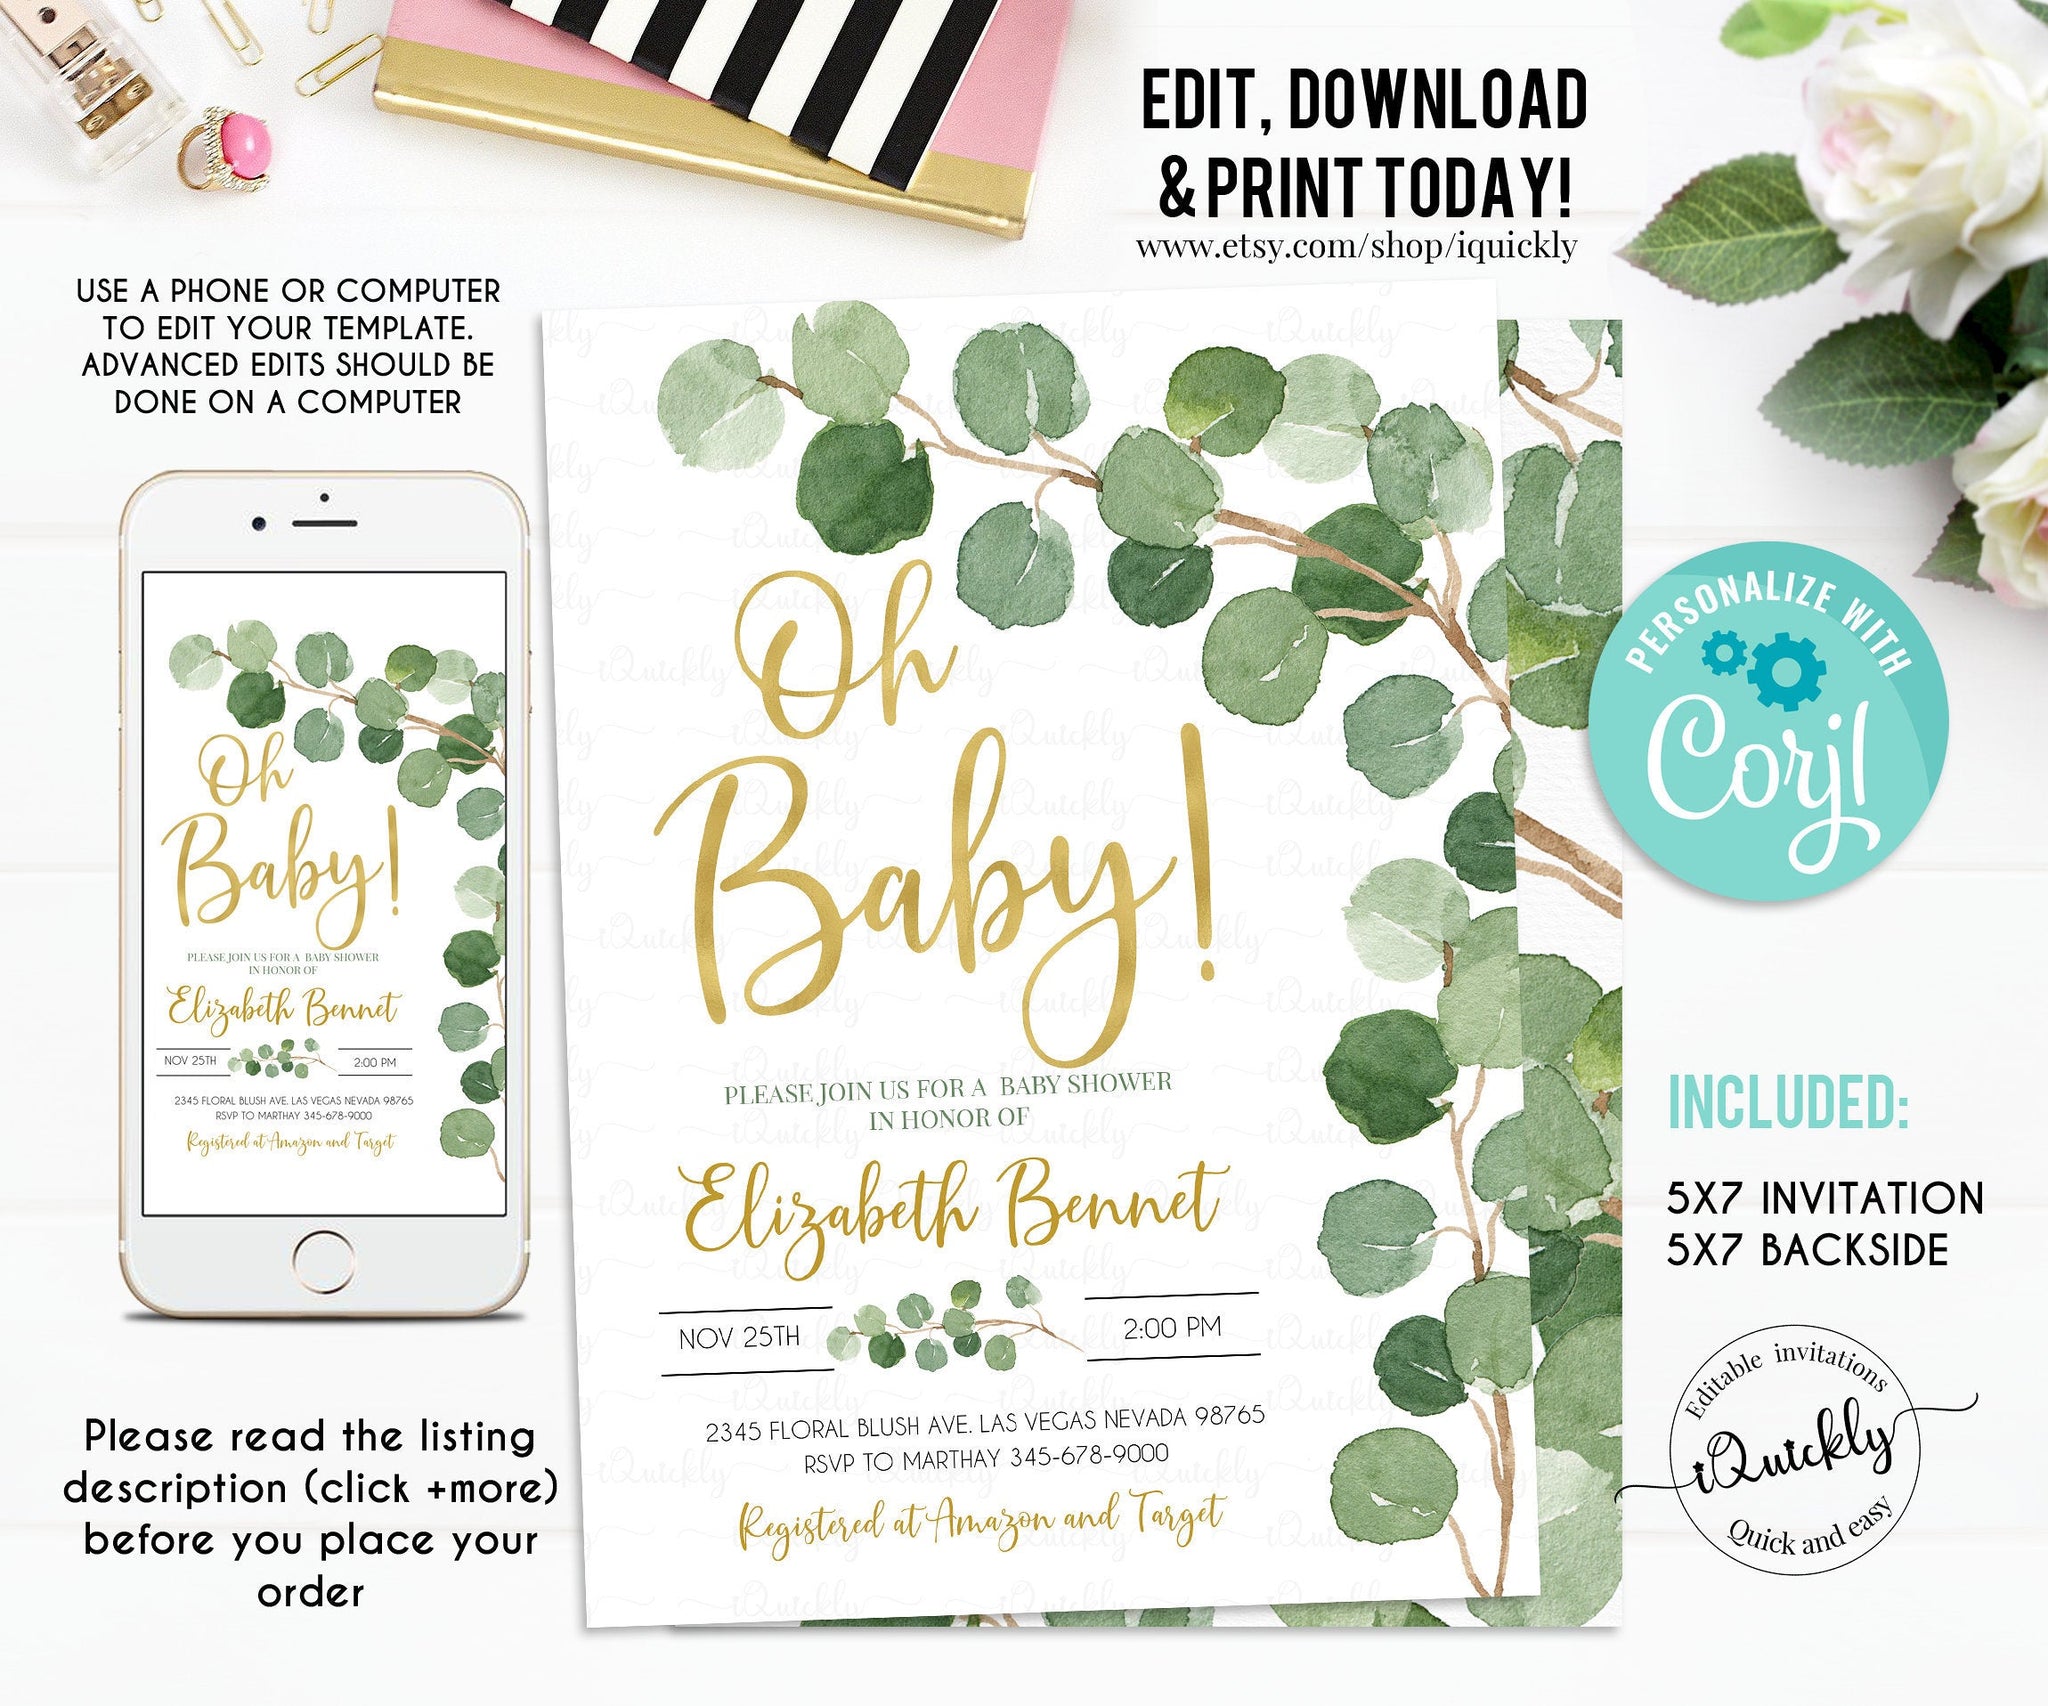 Eucalyptus Baby Shower Invitation Editable, Greenery Gender Neutral Invite, Green Gold Rustic Invitations Instant download Oh baby template